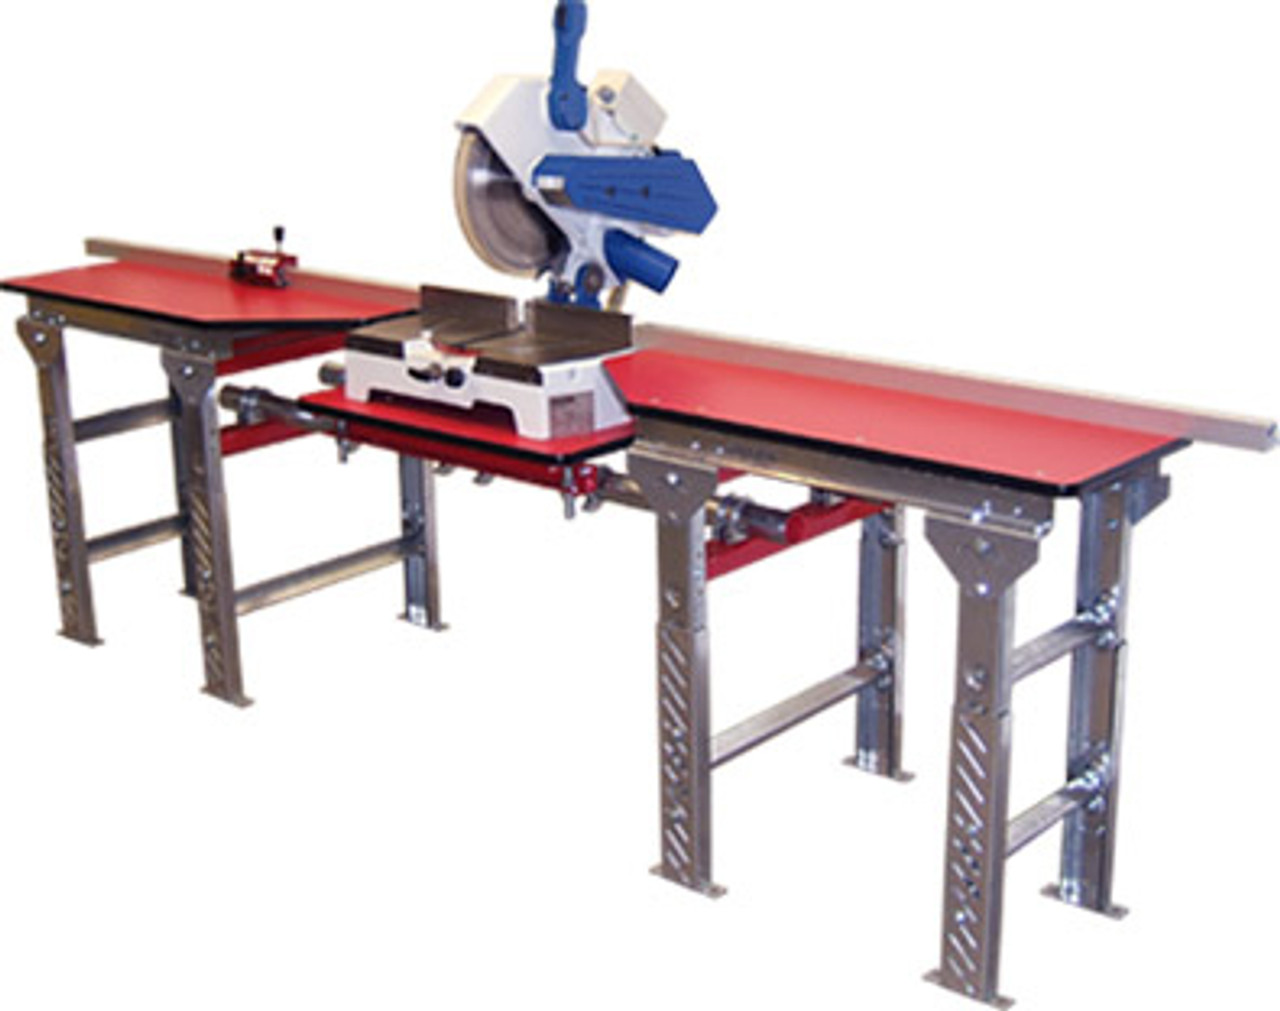 QSMT-8.5x4-FS-S QuickSilver Miter Saw Tables, 8.5ft. - 4ft., solid top, by Hoffmann-USA